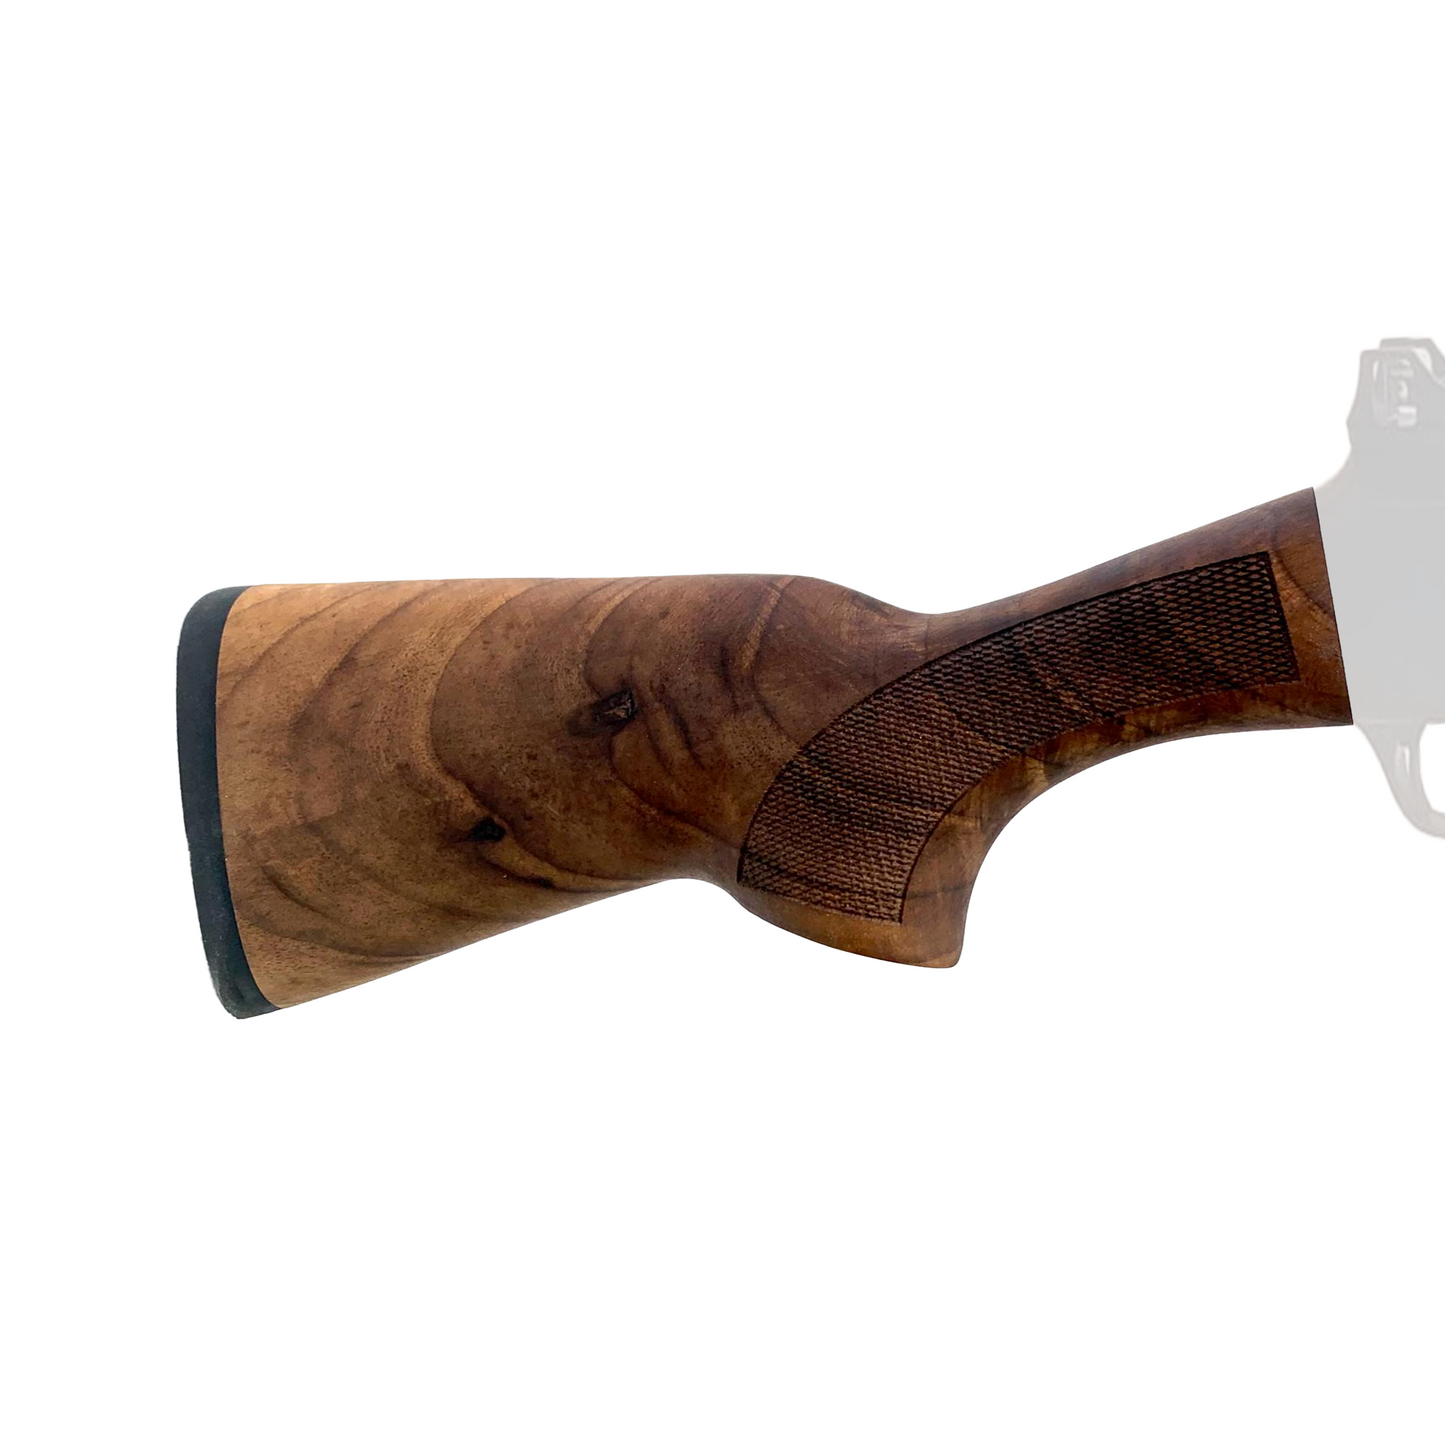 Emperor Arms Royal Crown 20 GA Turkish Walnut Youth Stock: Compact Elegance for Junior Shooters - 9.5" x 4.5"